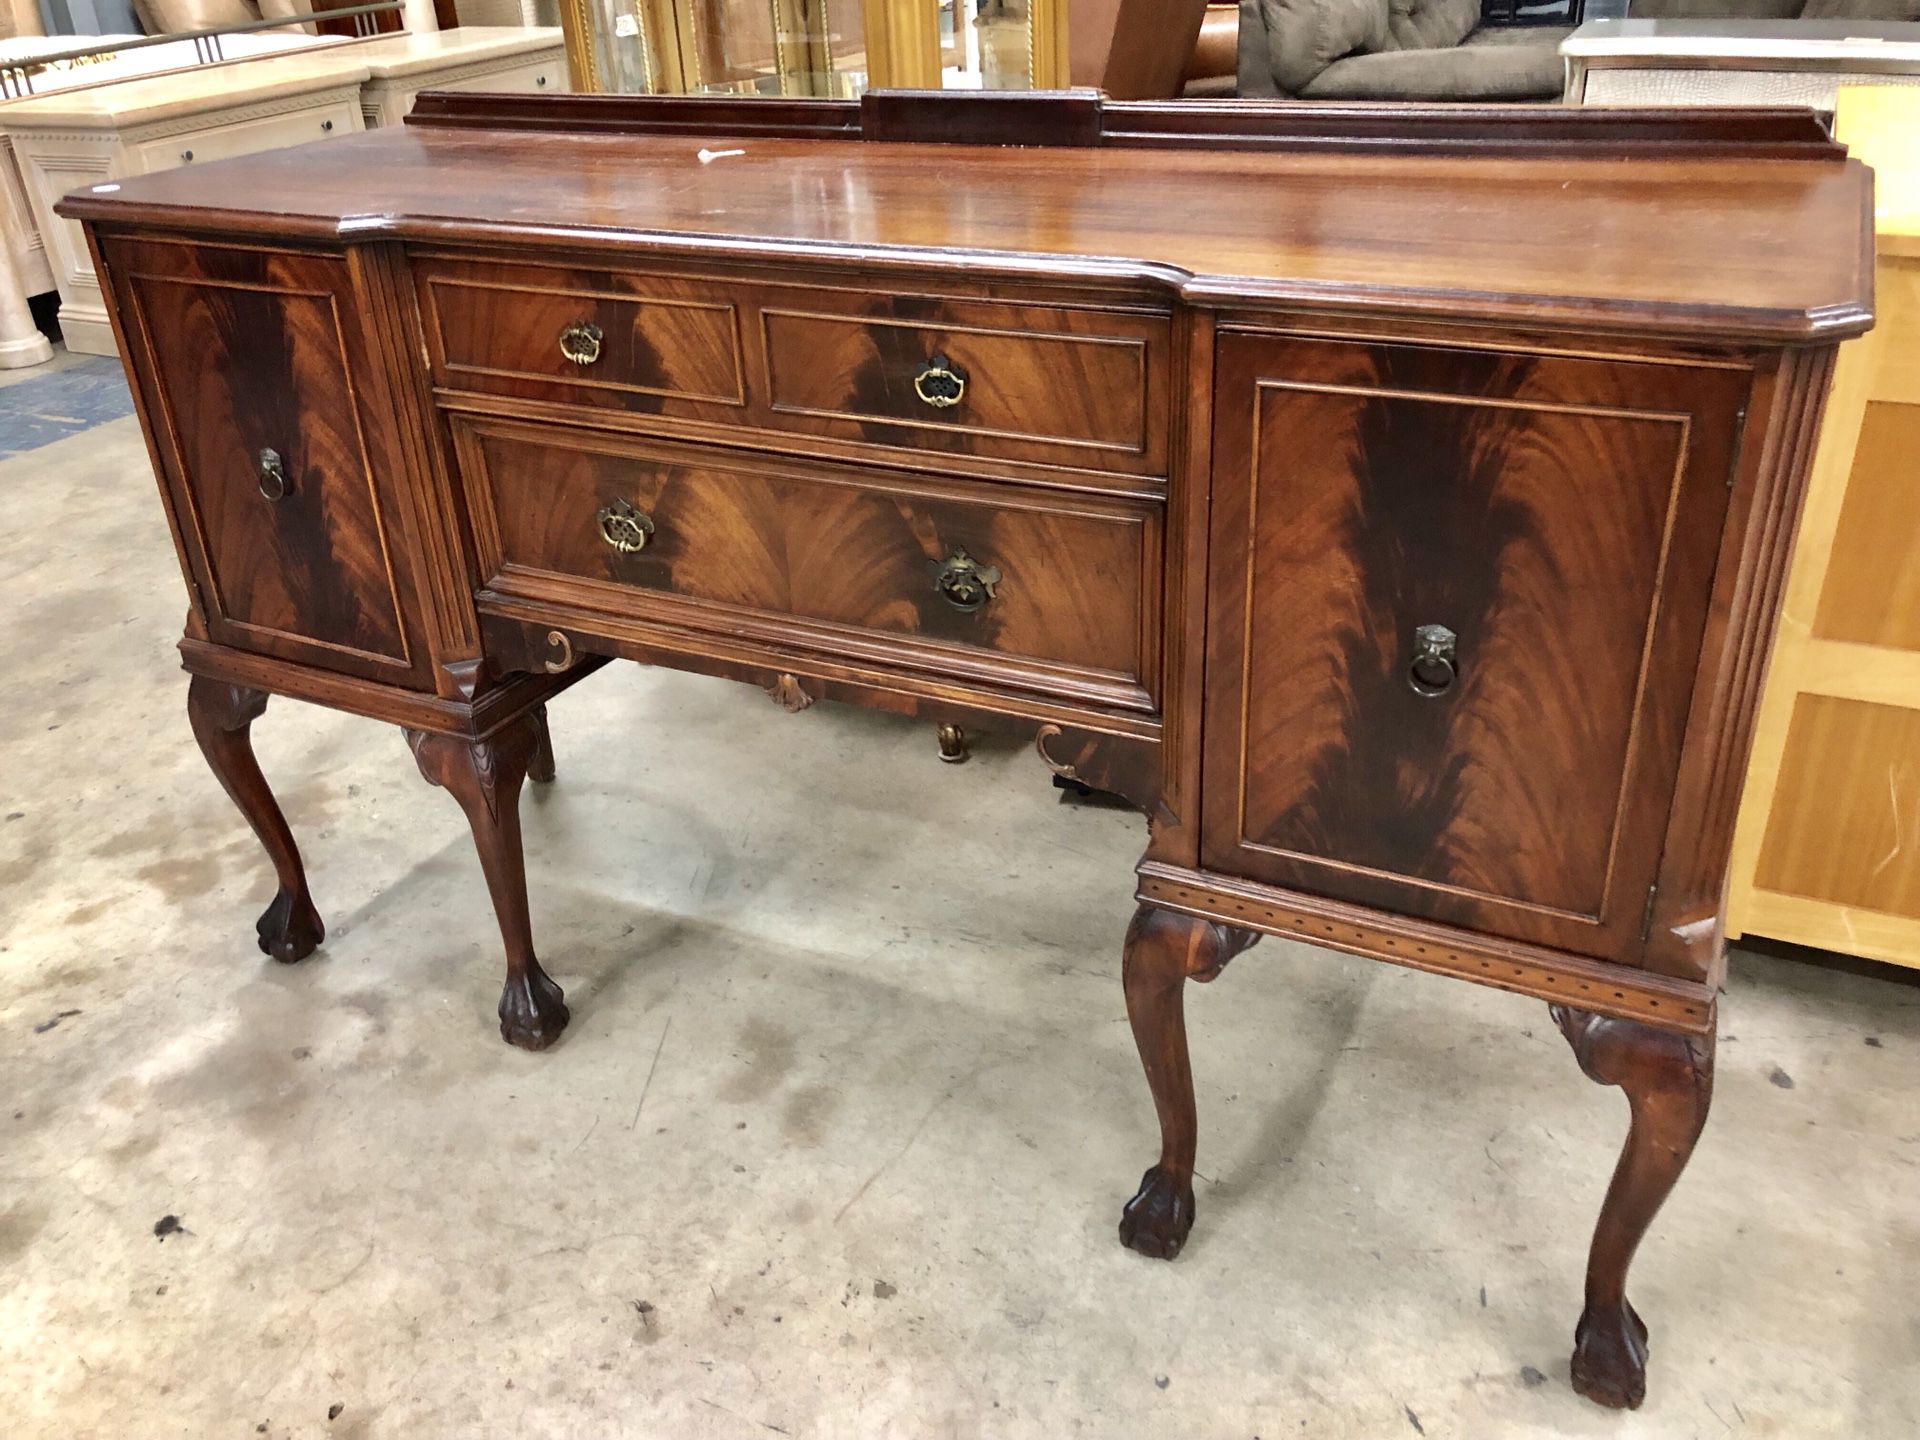 Server/sideboard with wooden inlays and dove tail drawers NOW REDUCED